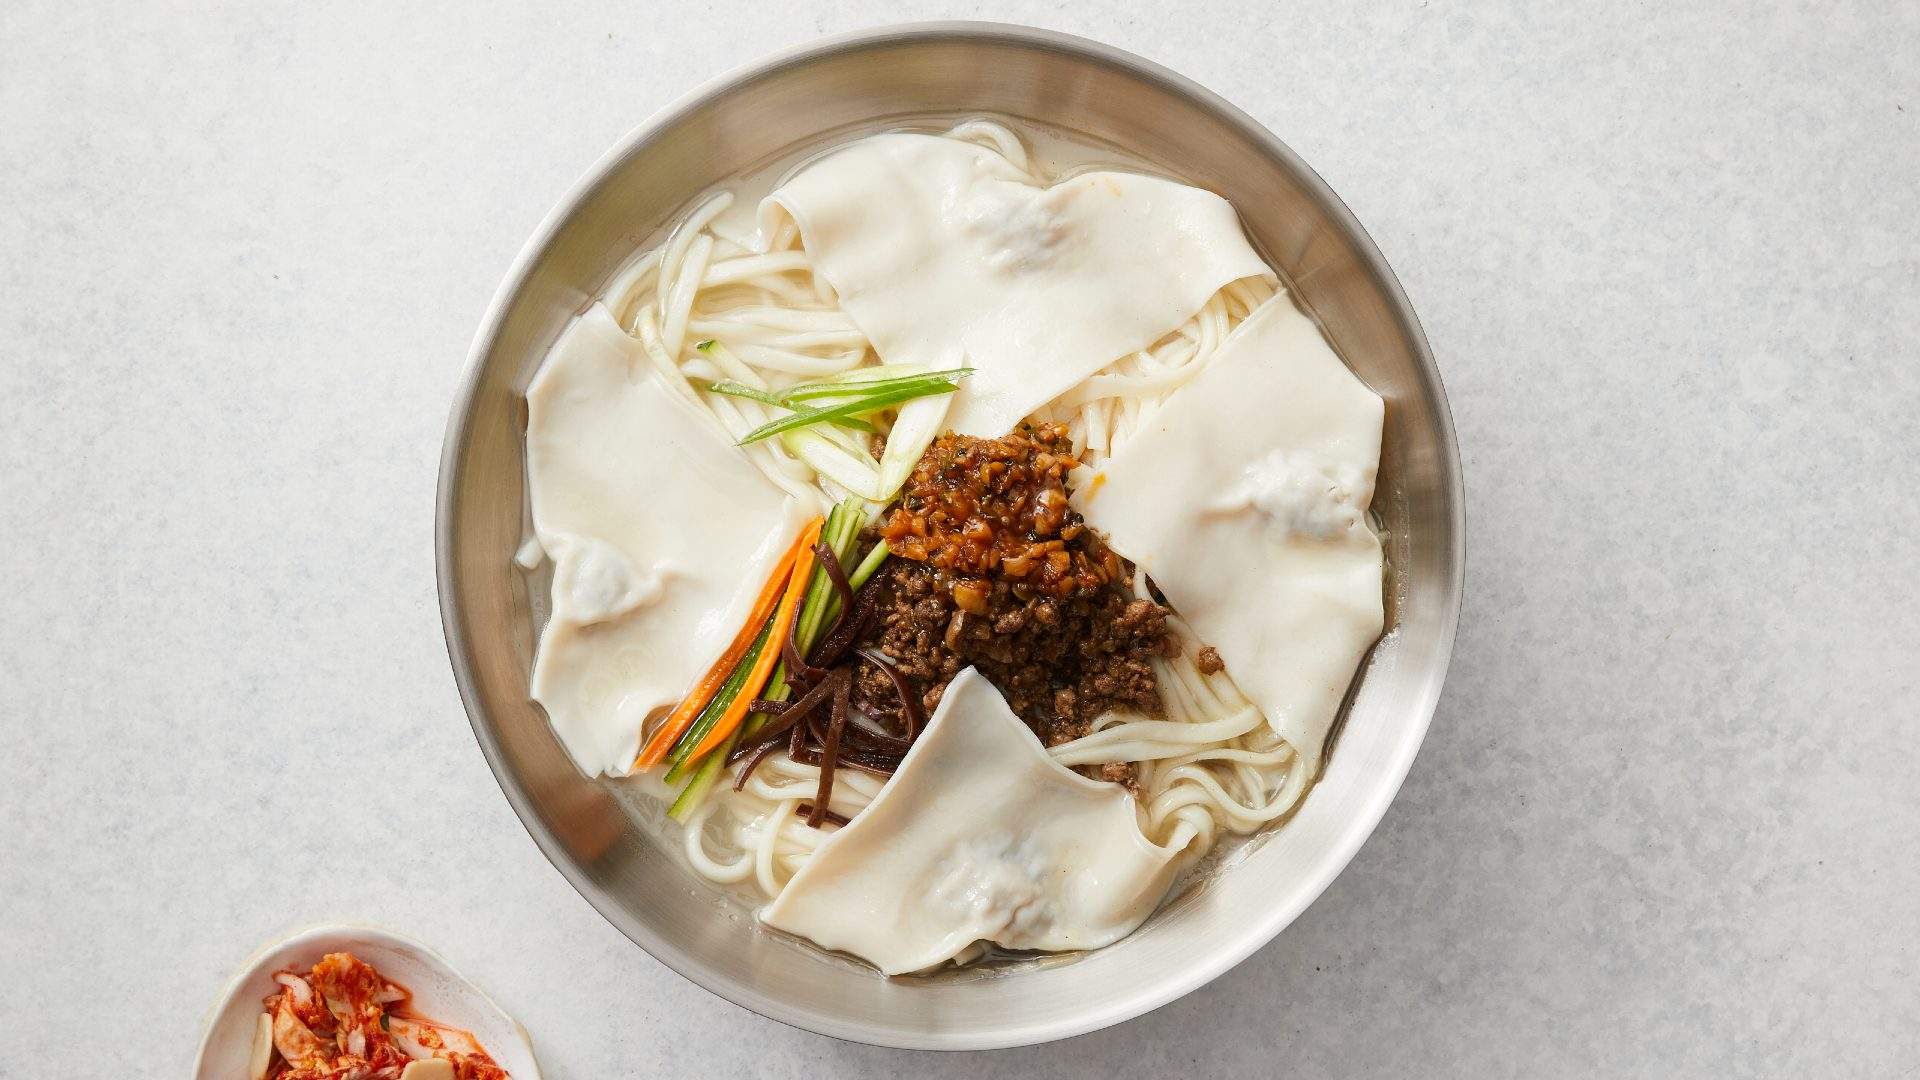 Market Seoul Soul Is Melbourne's New Korean Food Delivery Service from Four Top Restaurants